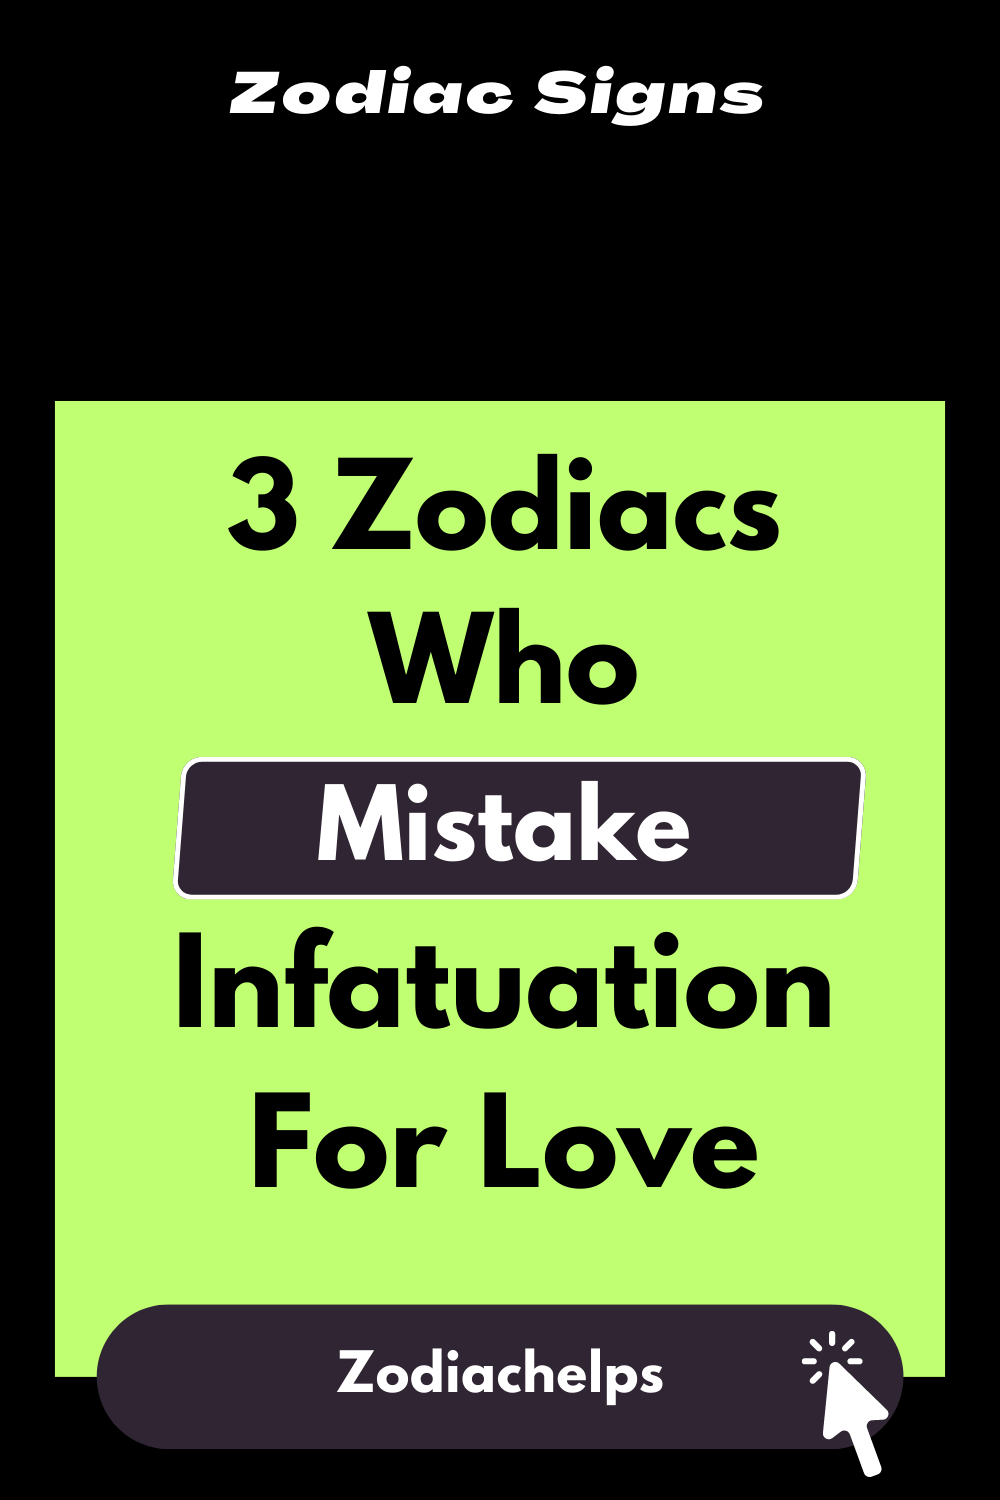 3 Zodiacs Who Mistake Infatuation For Love